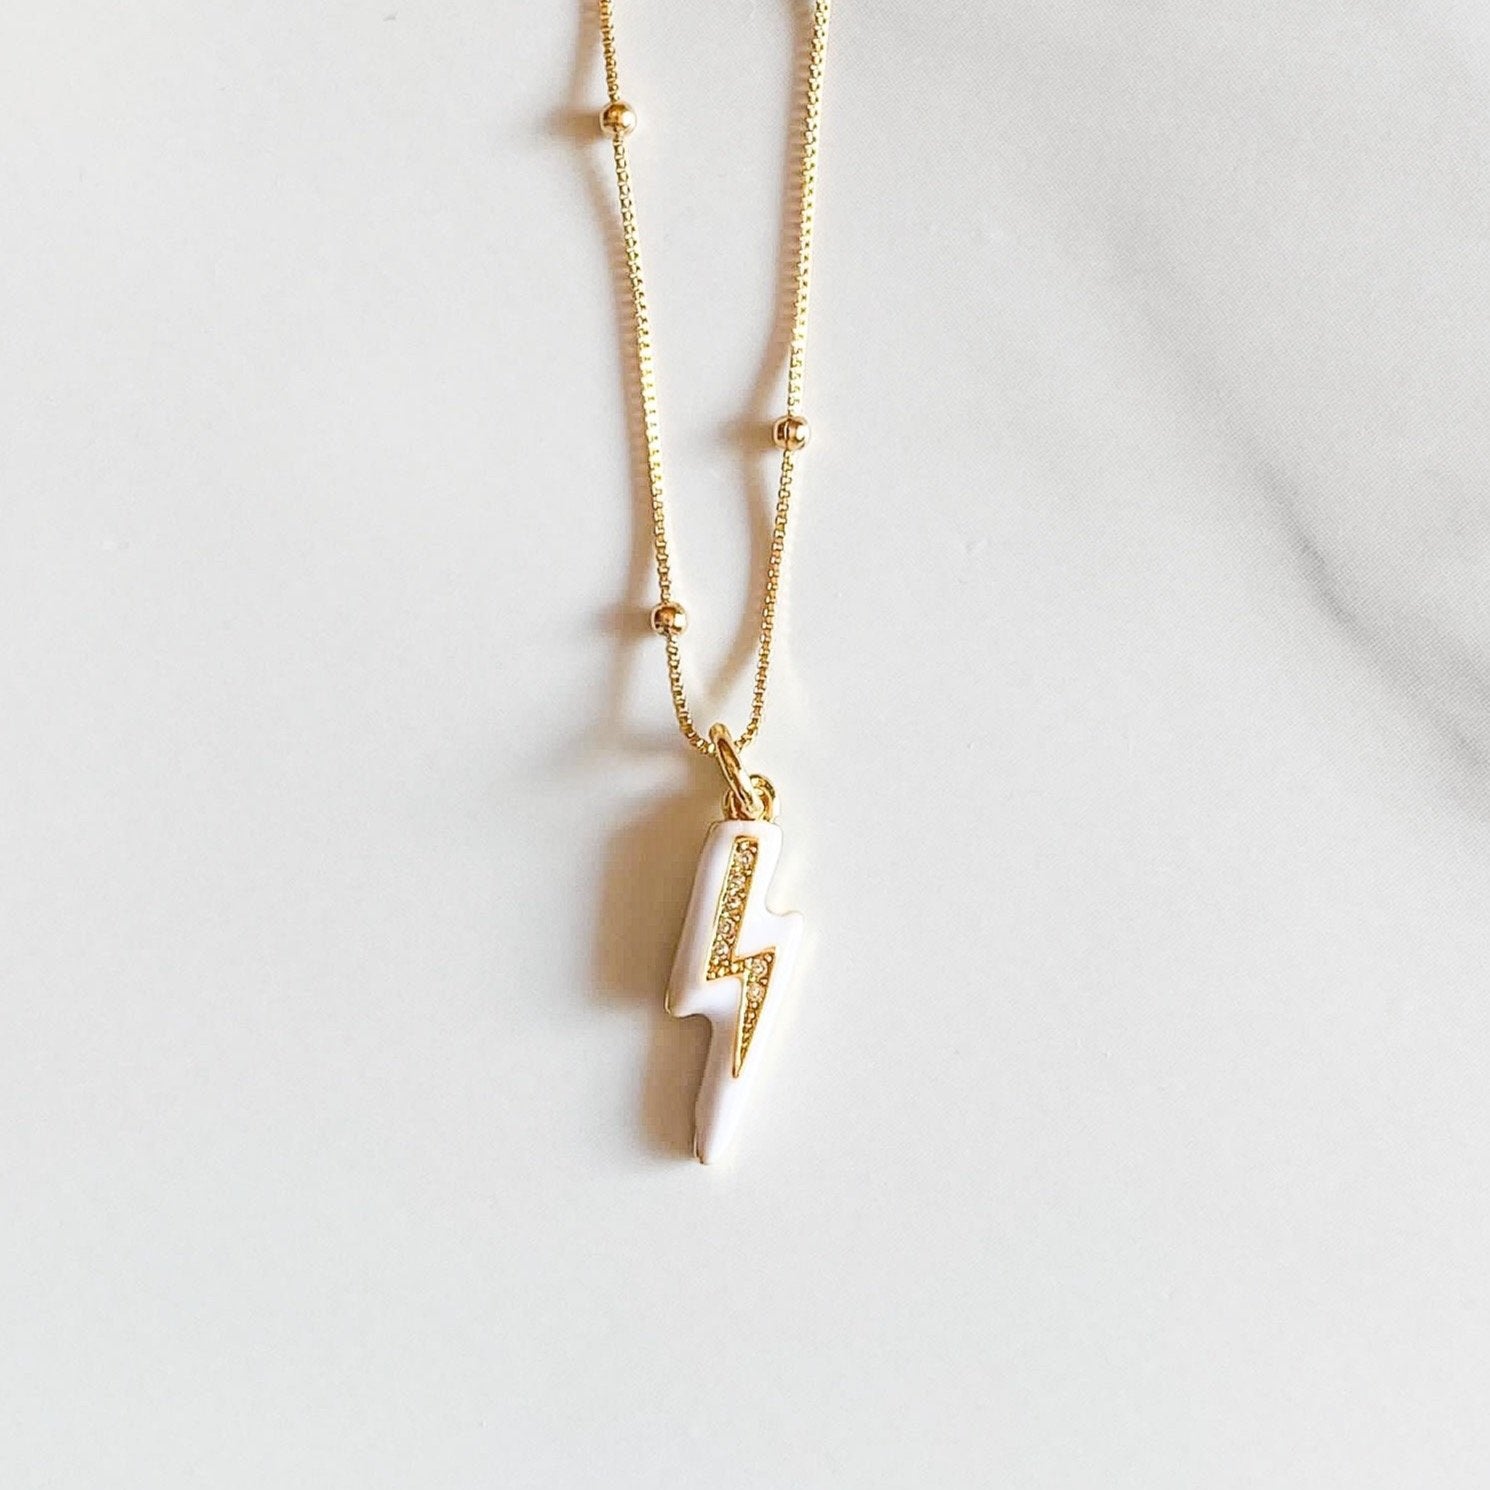 Jens lighting bold necklace, white enamel, gold-plated bold, gold-foilled necklace by ISVI Boutique Miami